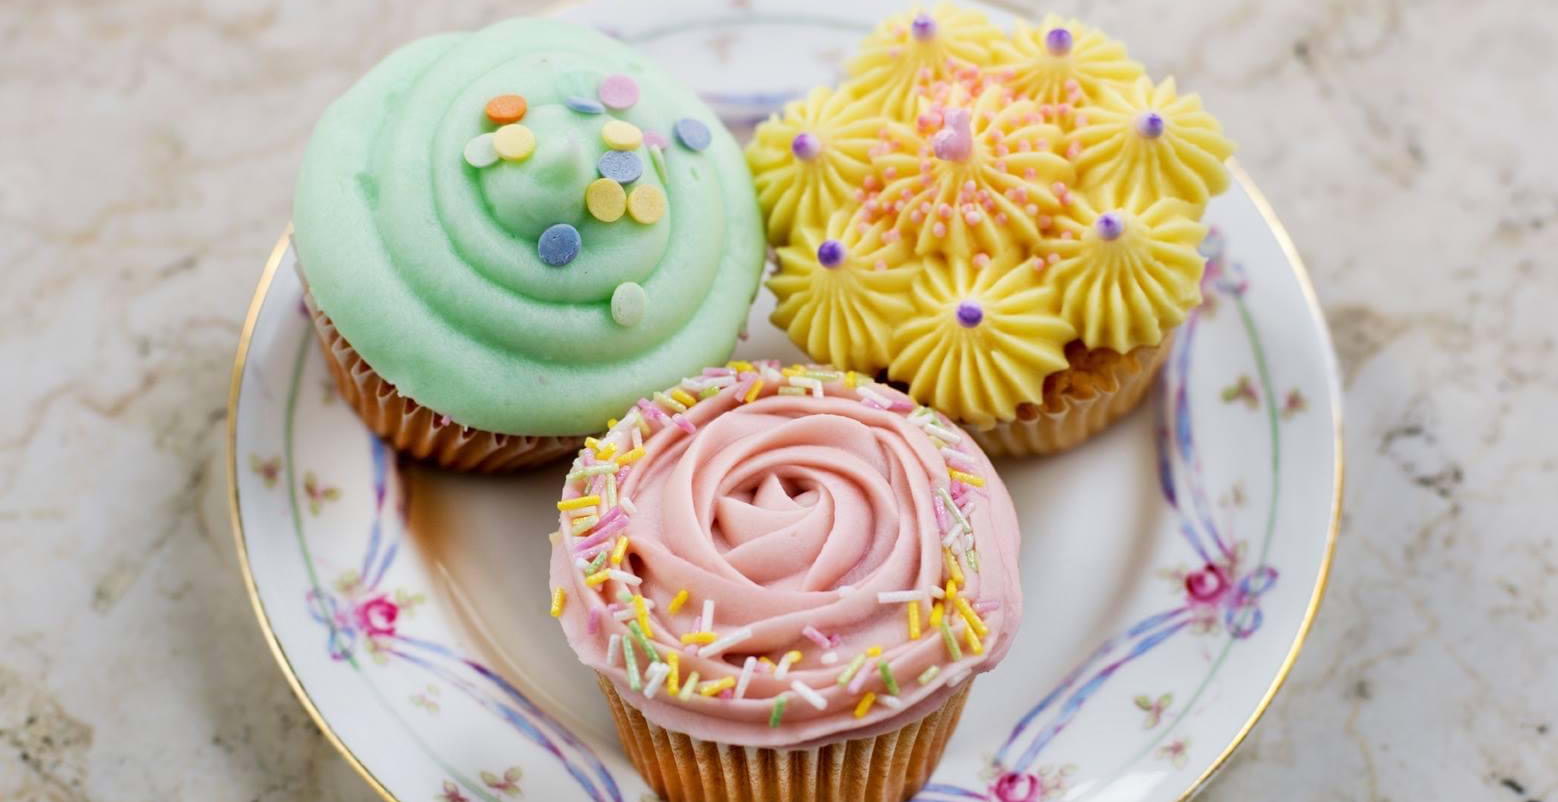 Become a cupcake-decorating pro at Brickfields Hall